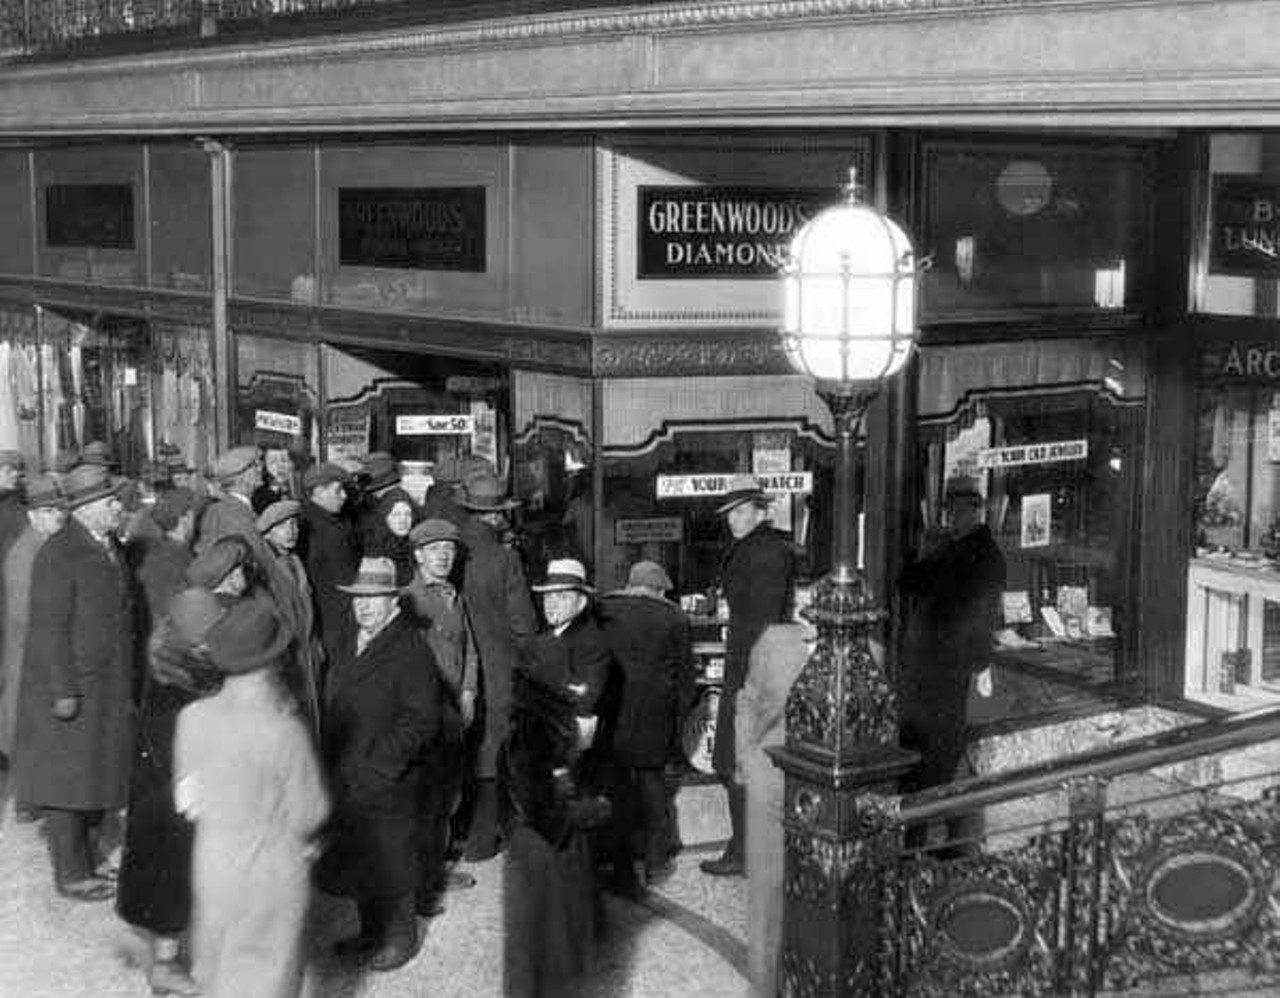 Crowd outside Greenwood's Diamonds in The Arcade, 1931